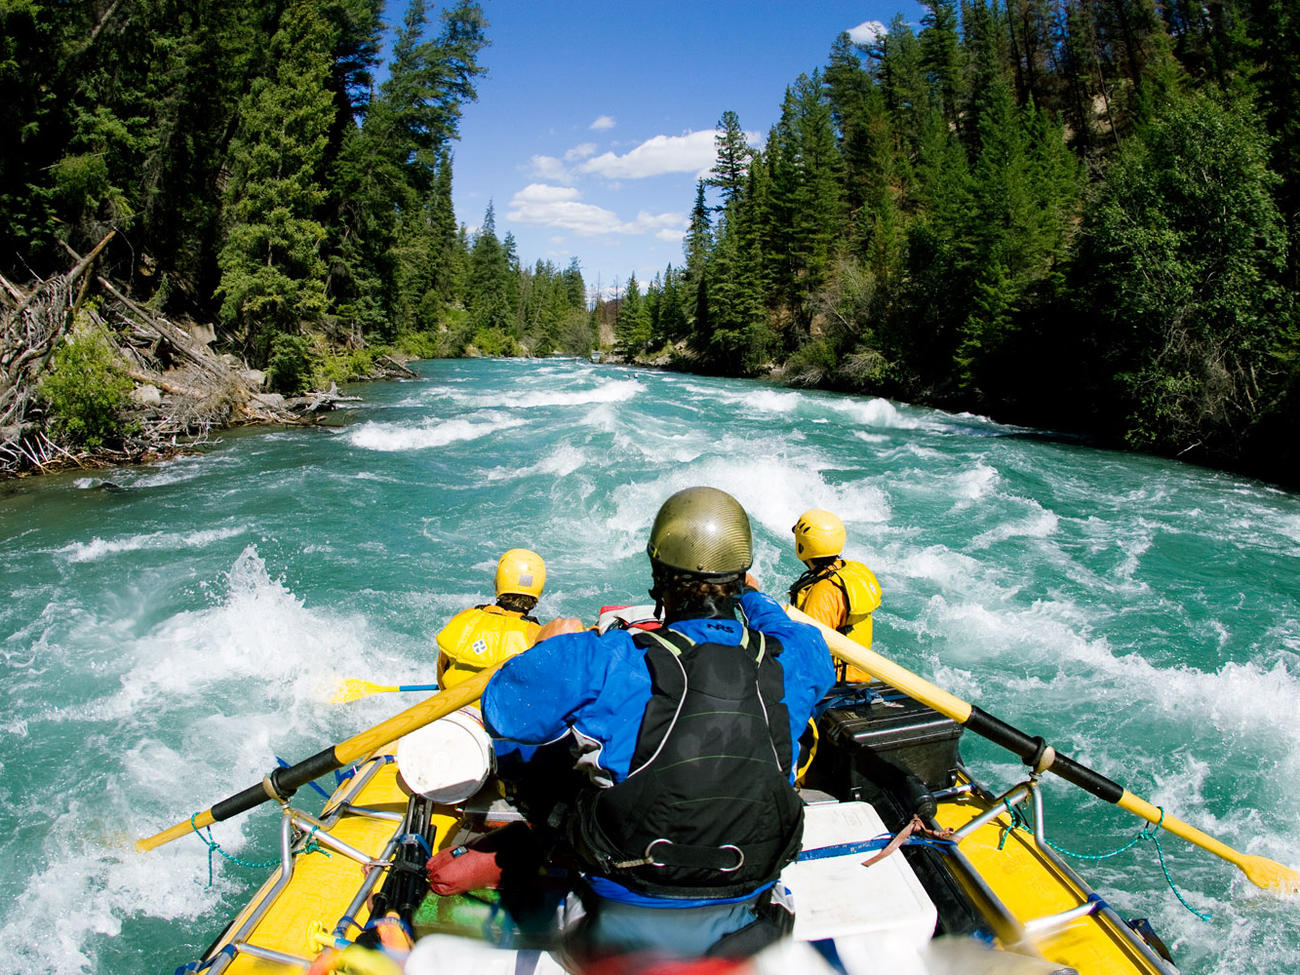 California’s Winter Rains Ended the Drought—and Now Summer Means Epic Rafting